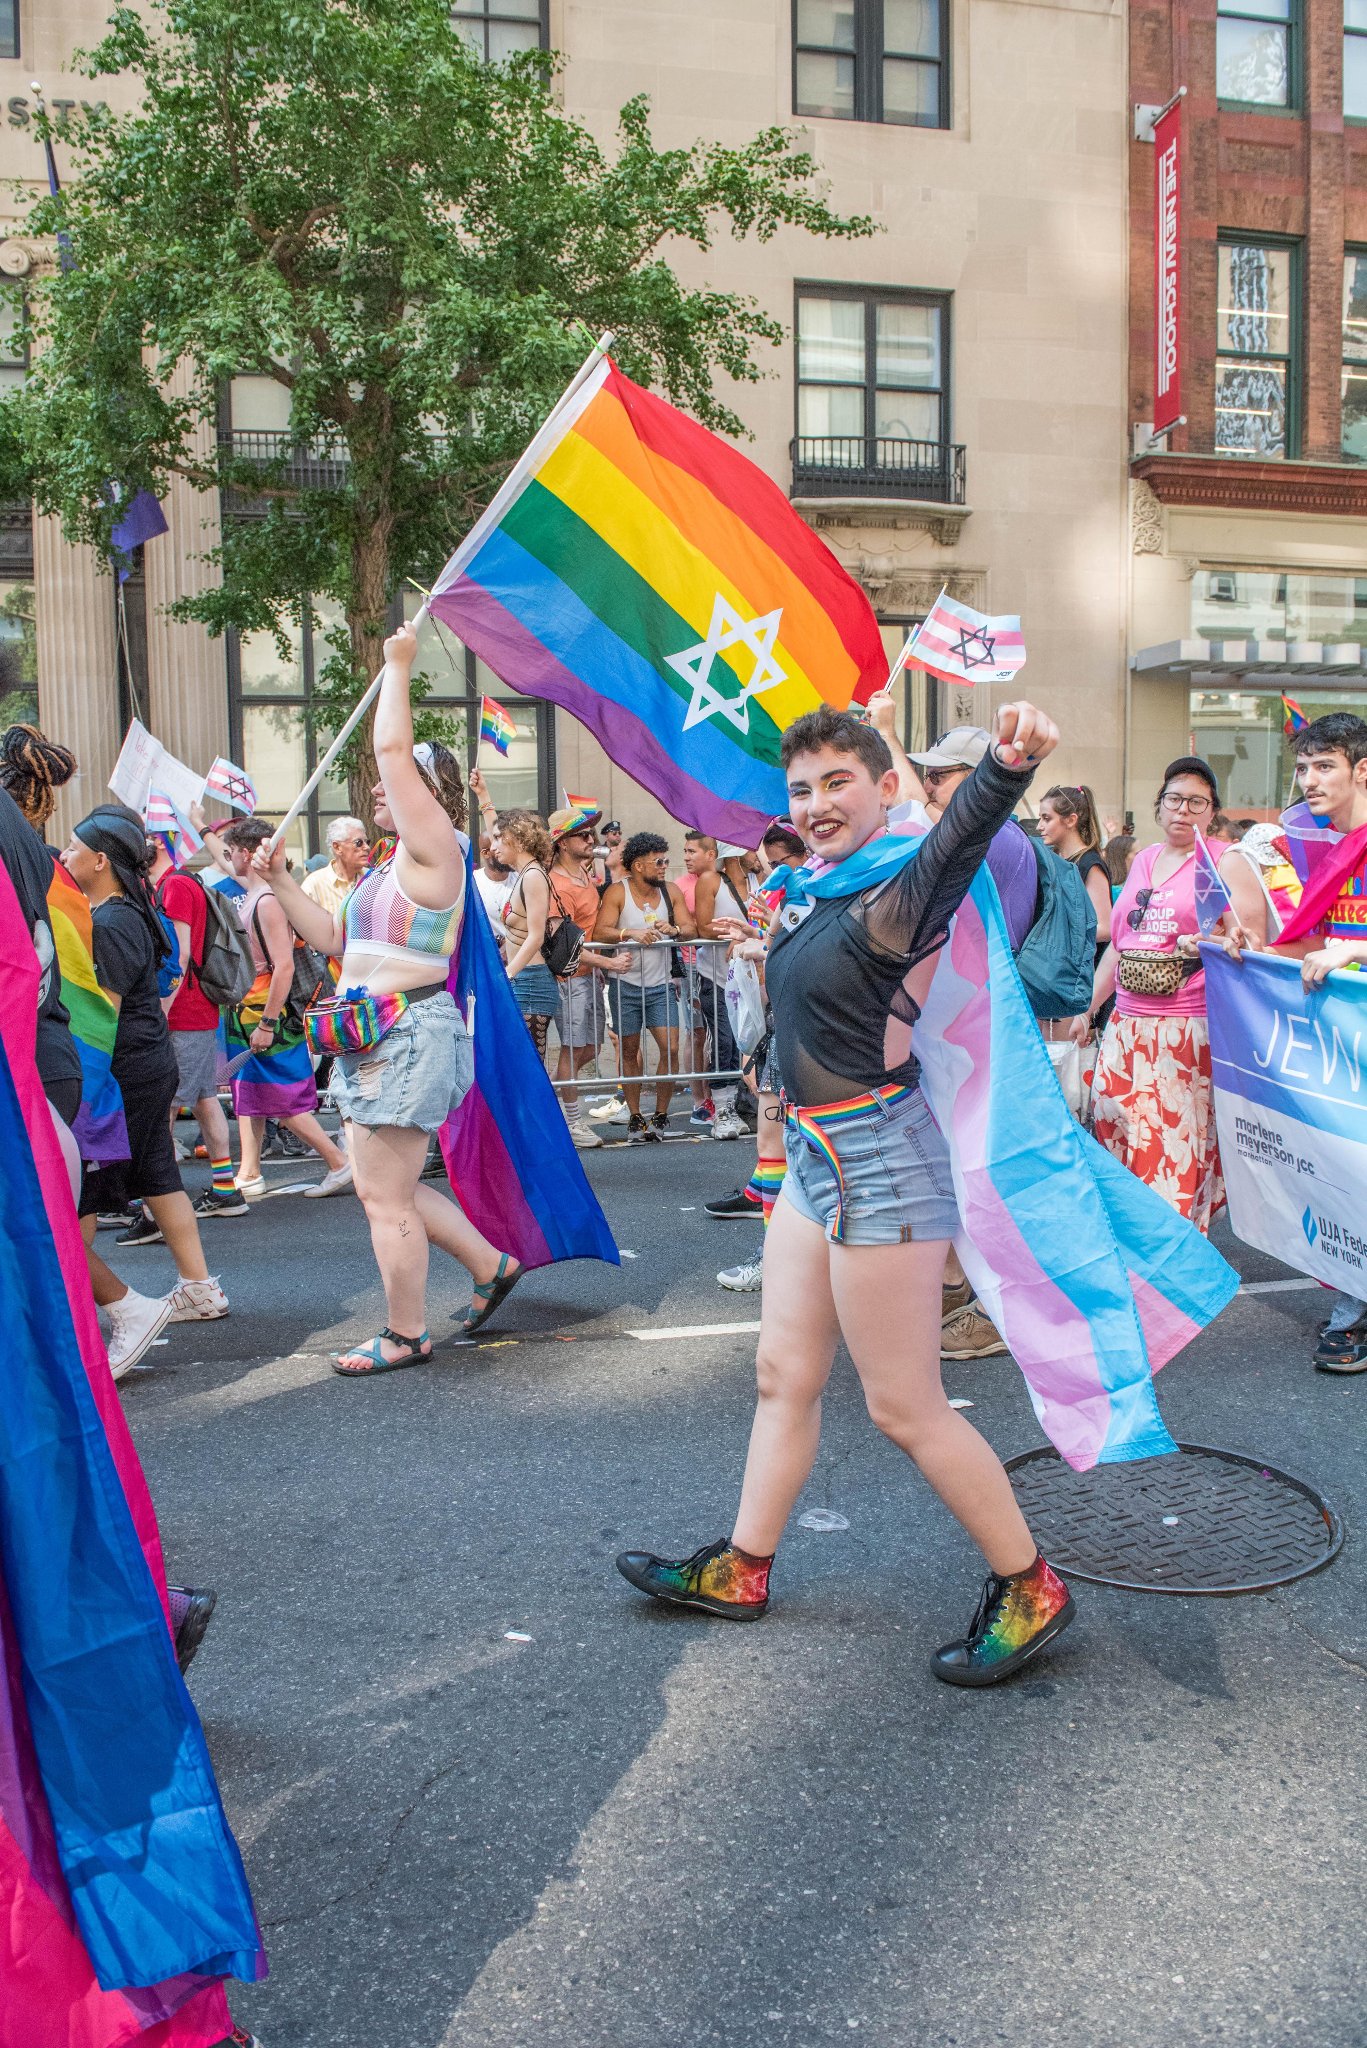 A group of people in a parade with rainbow flags with Stars of David on them.